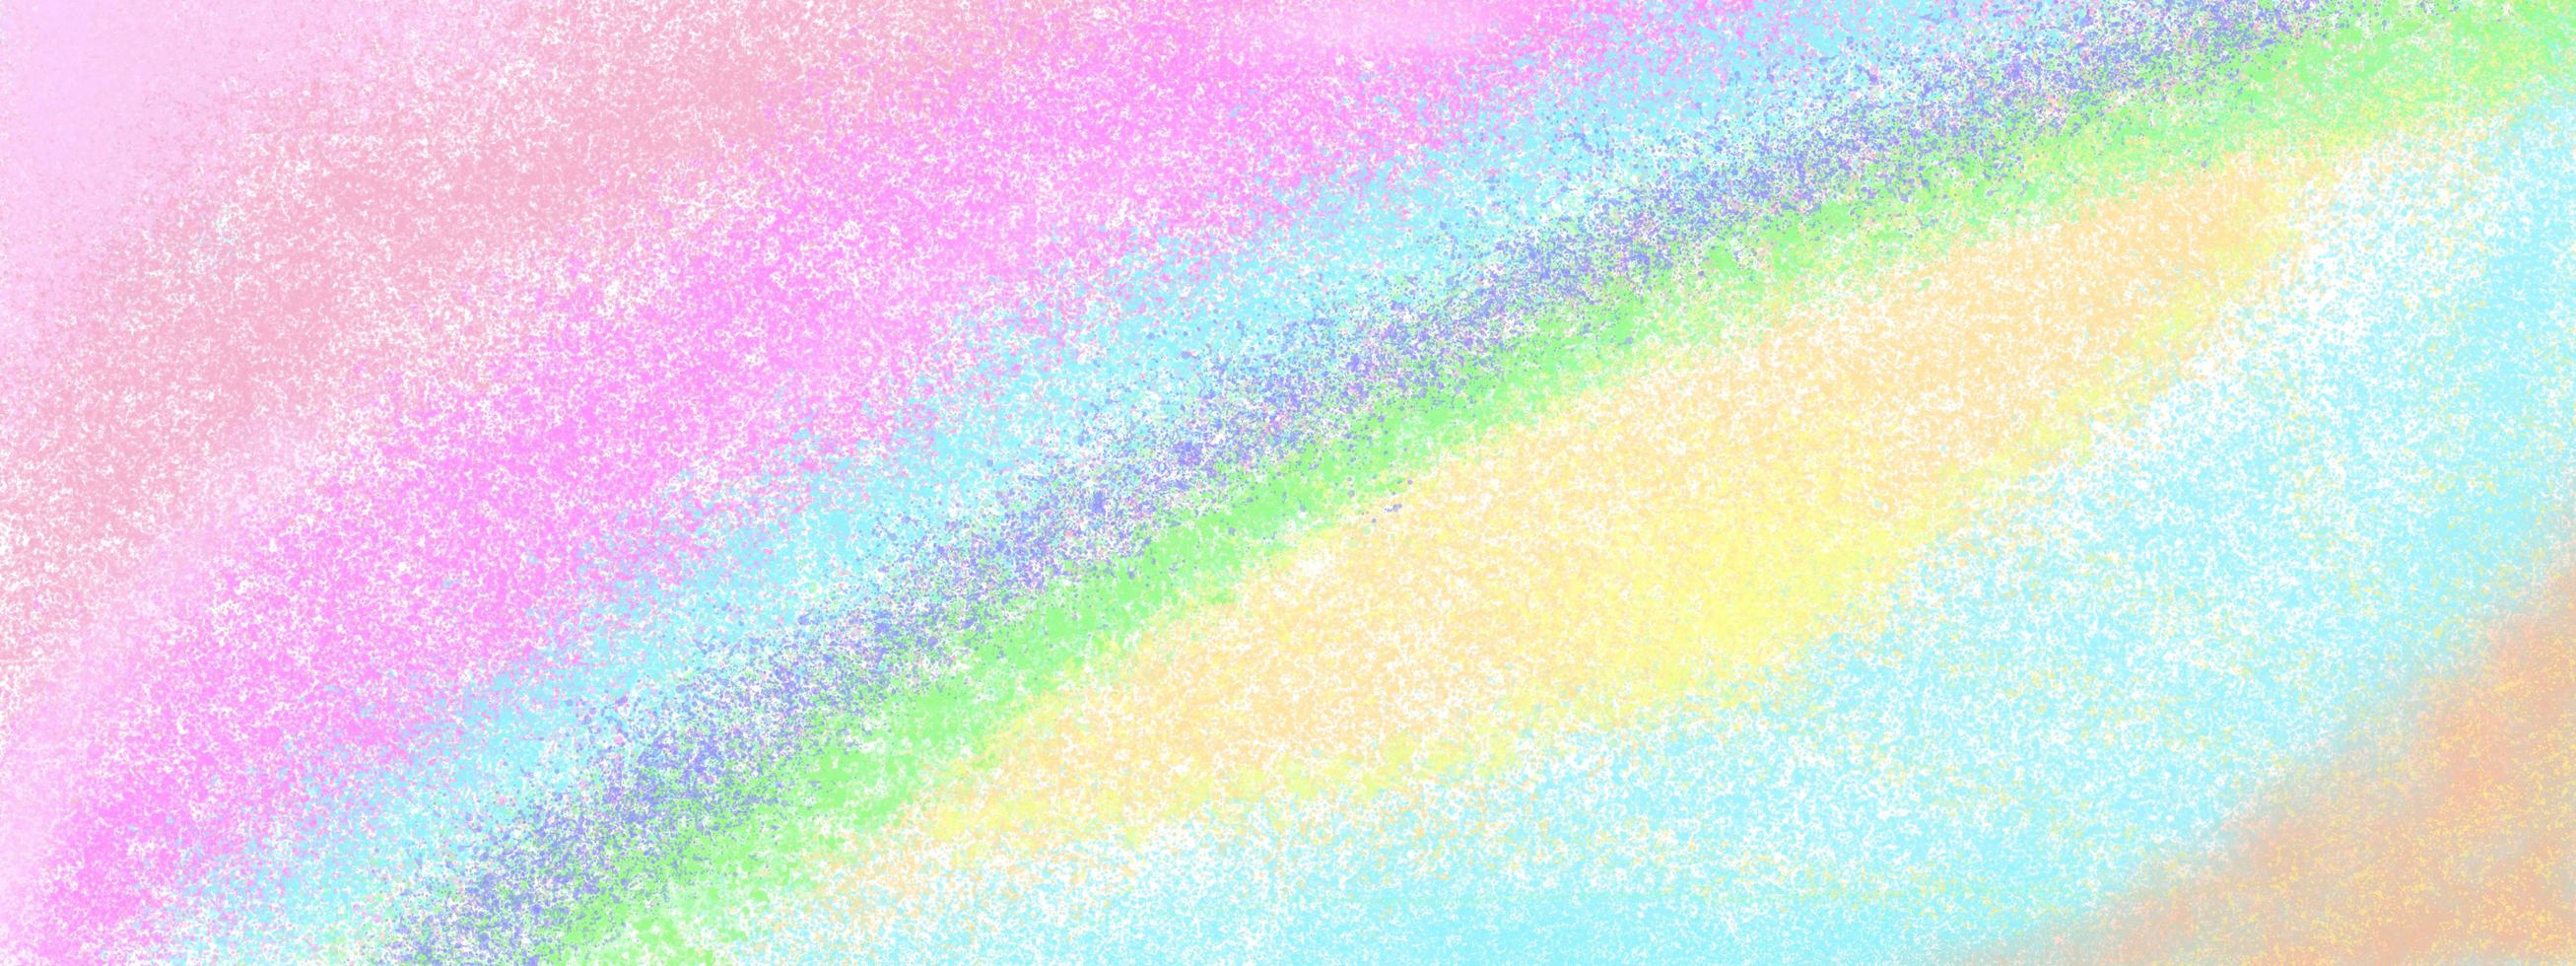 Abstract textured hand painted background. Rainbow colors. creative textured background for poster, banner, cards, scrapbook. photo